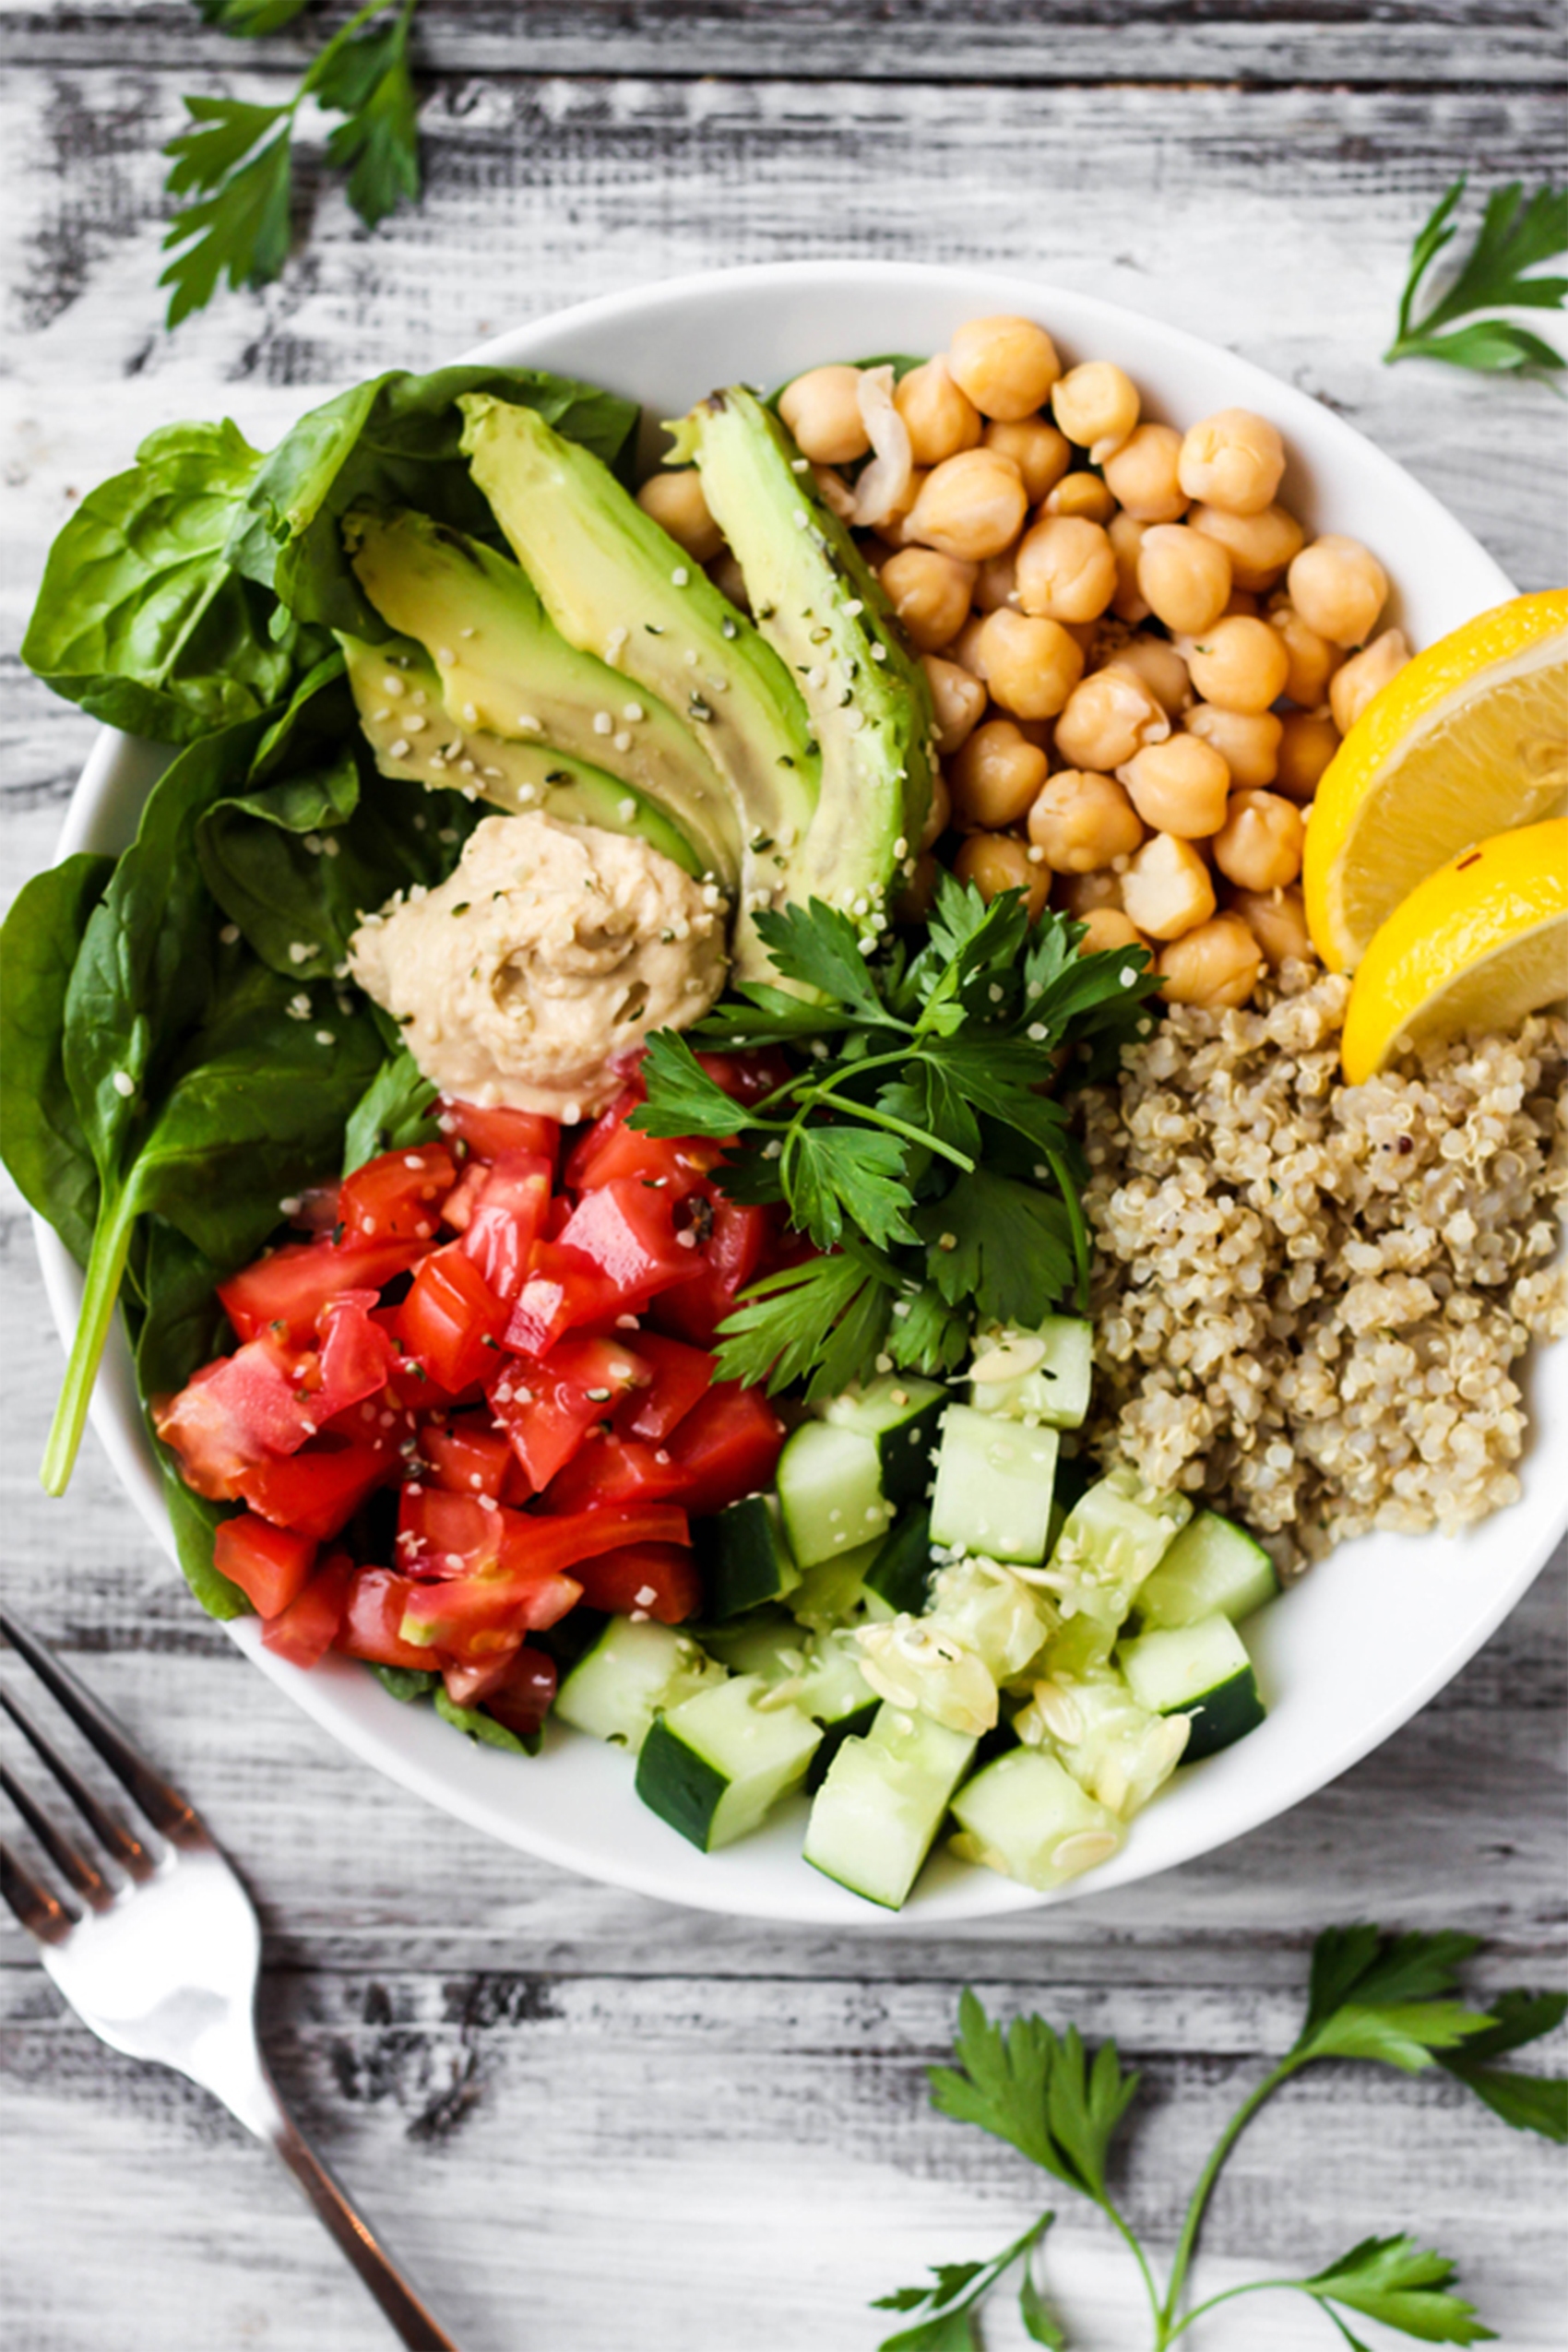 a bowl of tomatoes, cucumber, rice, chickpeas, avocado and greens